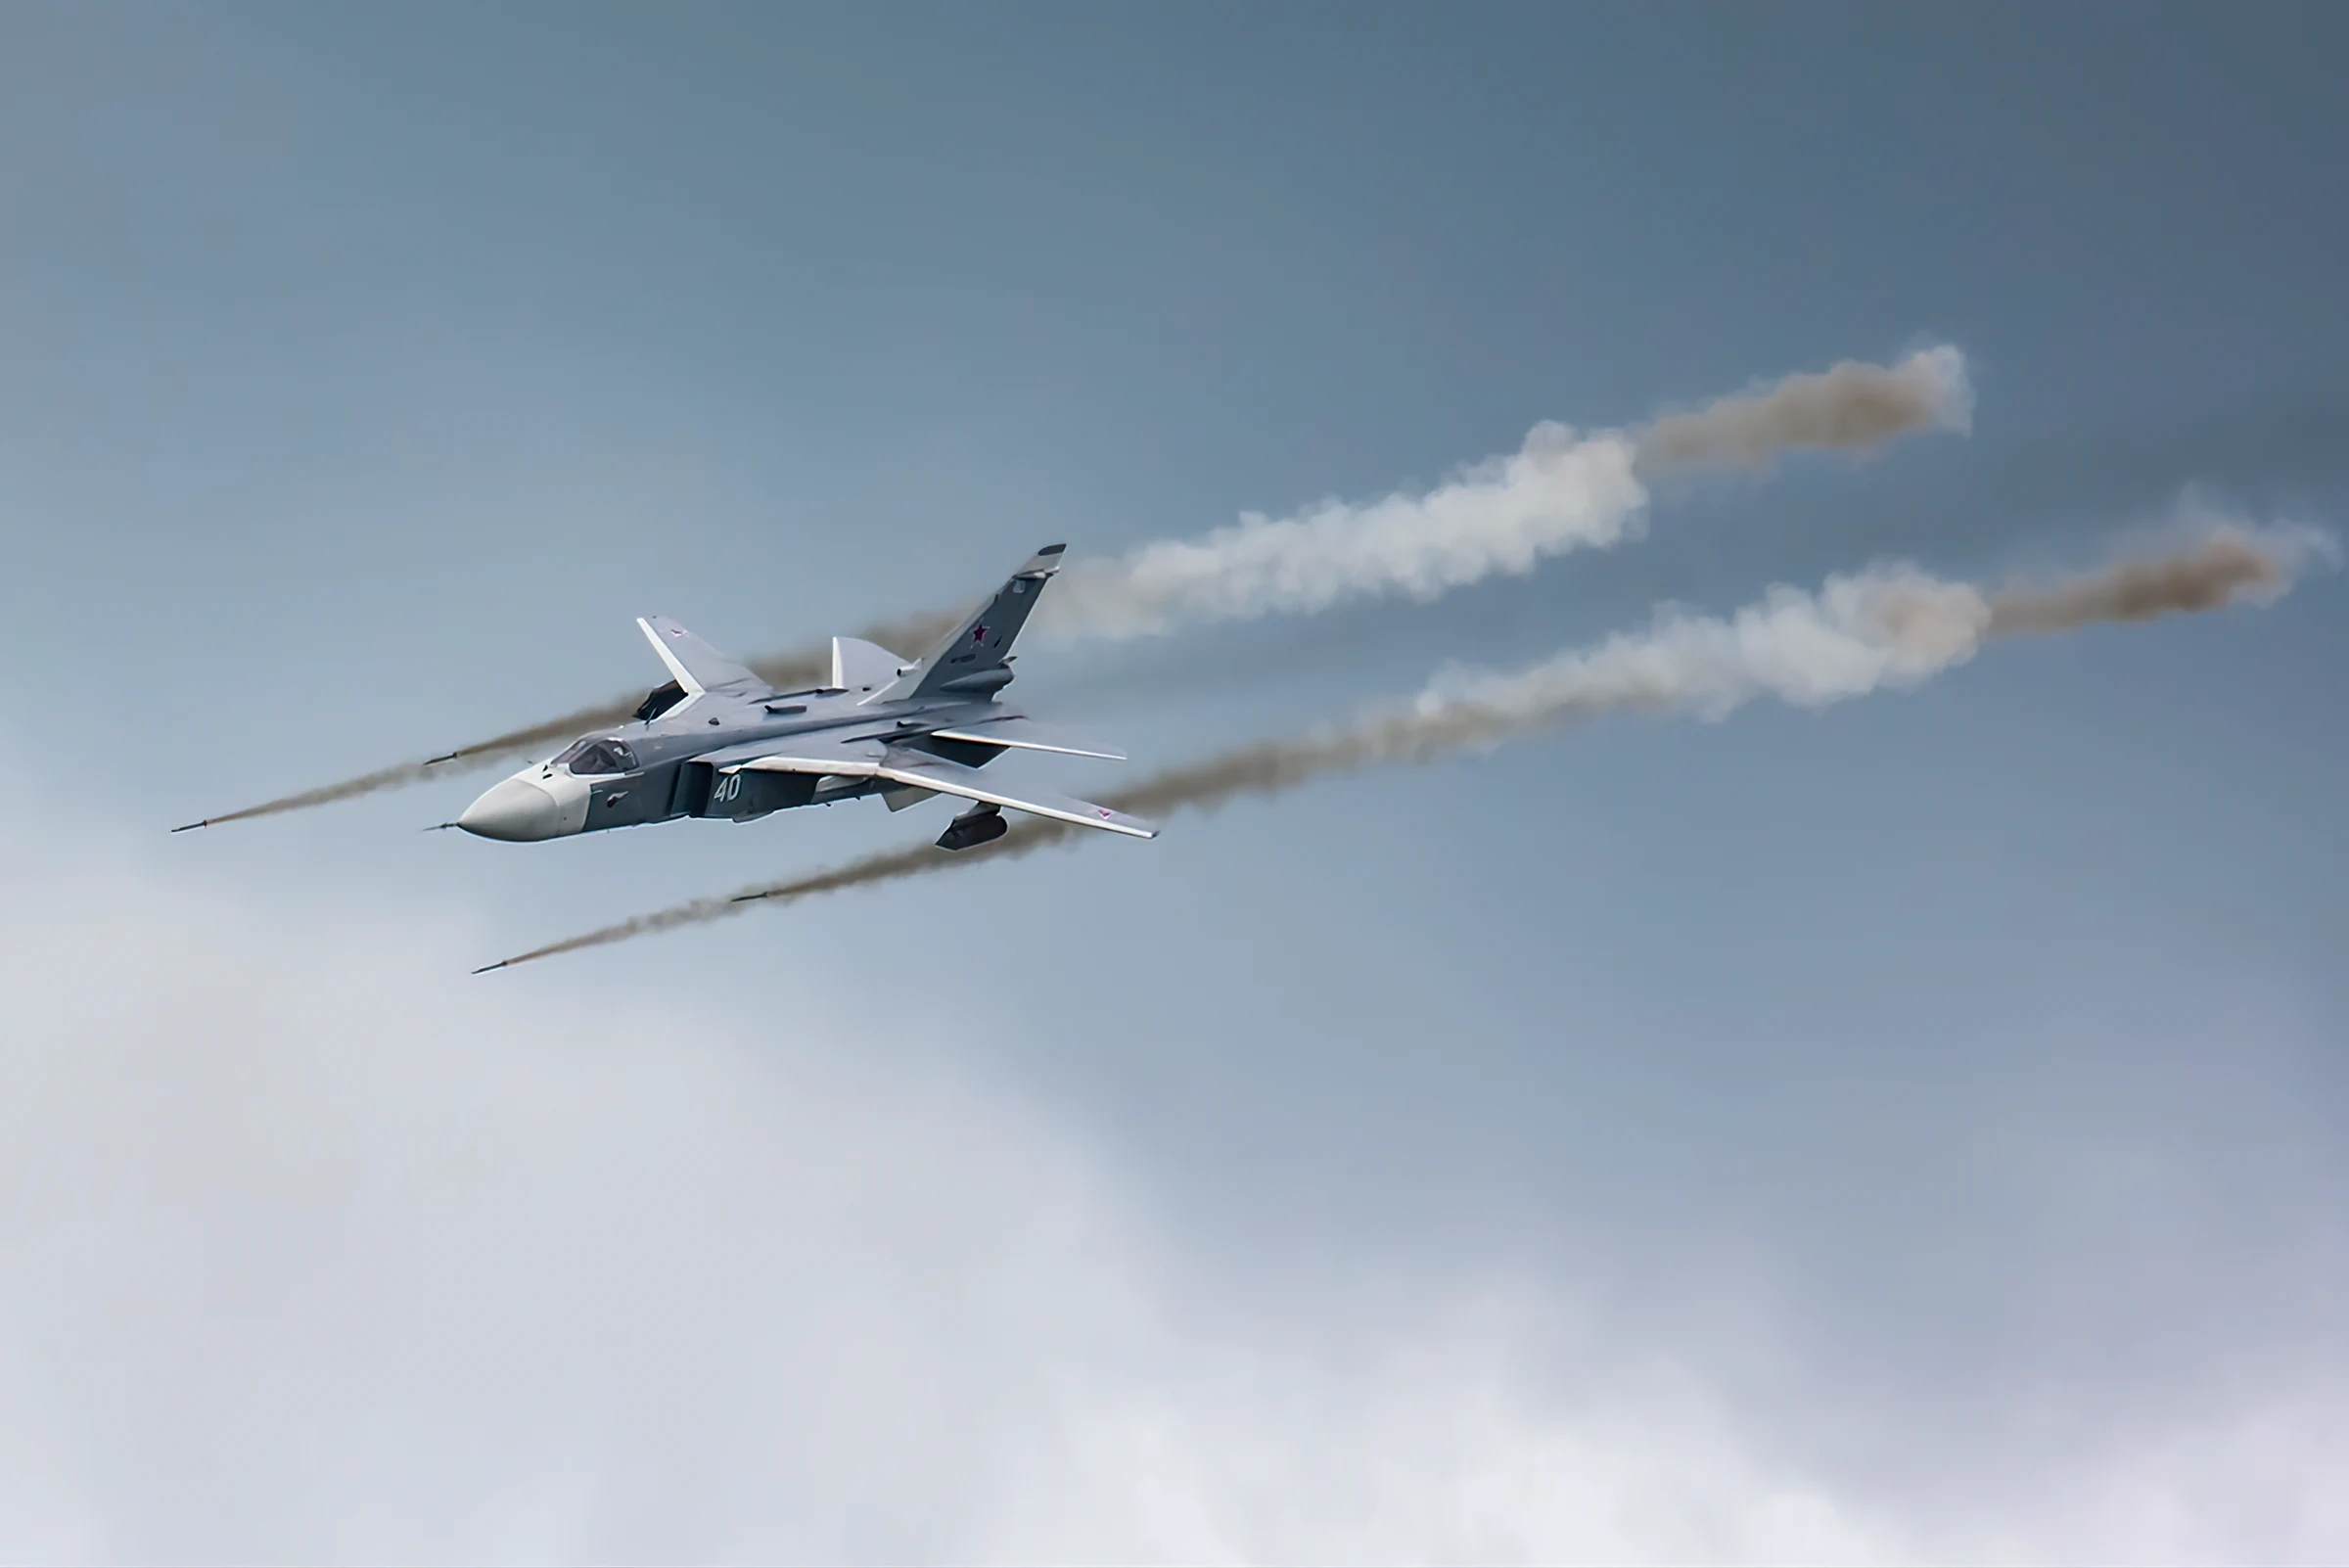 Two dead after Russian Su-24 fighter plane crashes